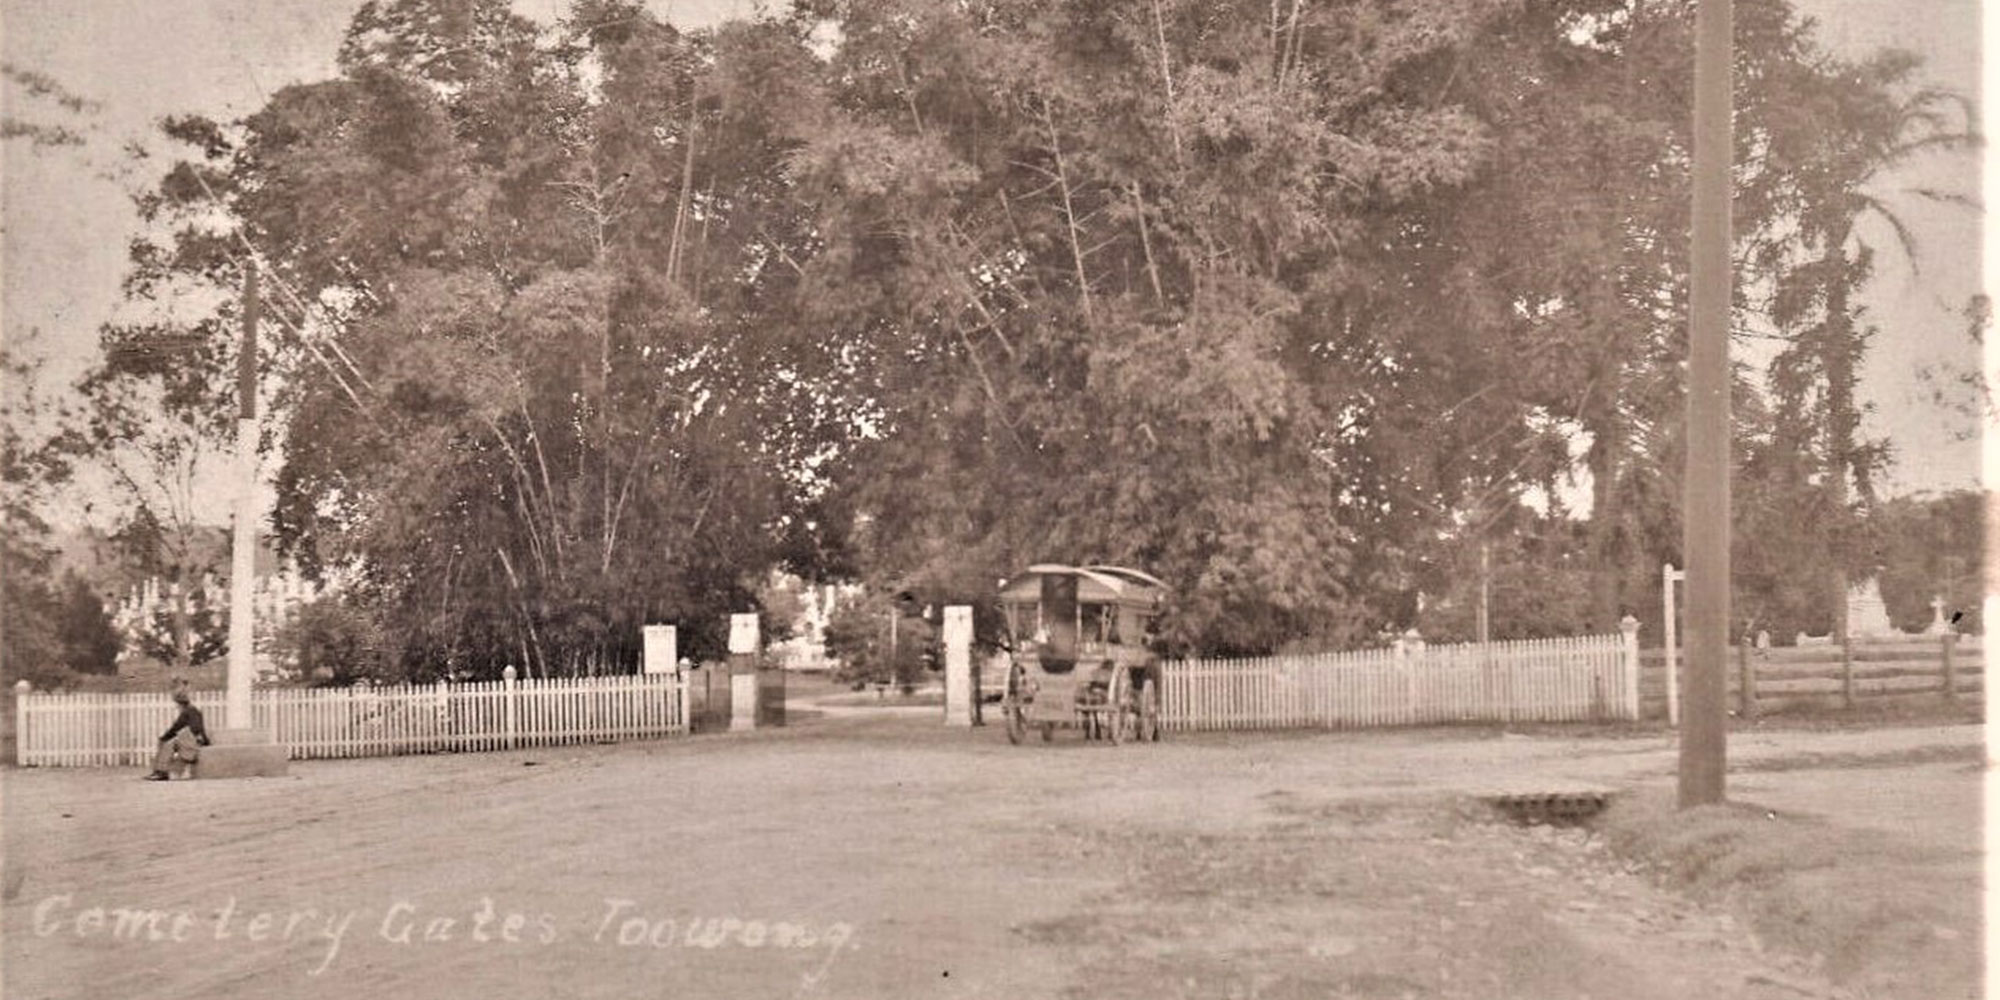 Cemetery Gates at Toowong, Brisbane, Qld early 1900s. Courtesy Brisbane City Council.